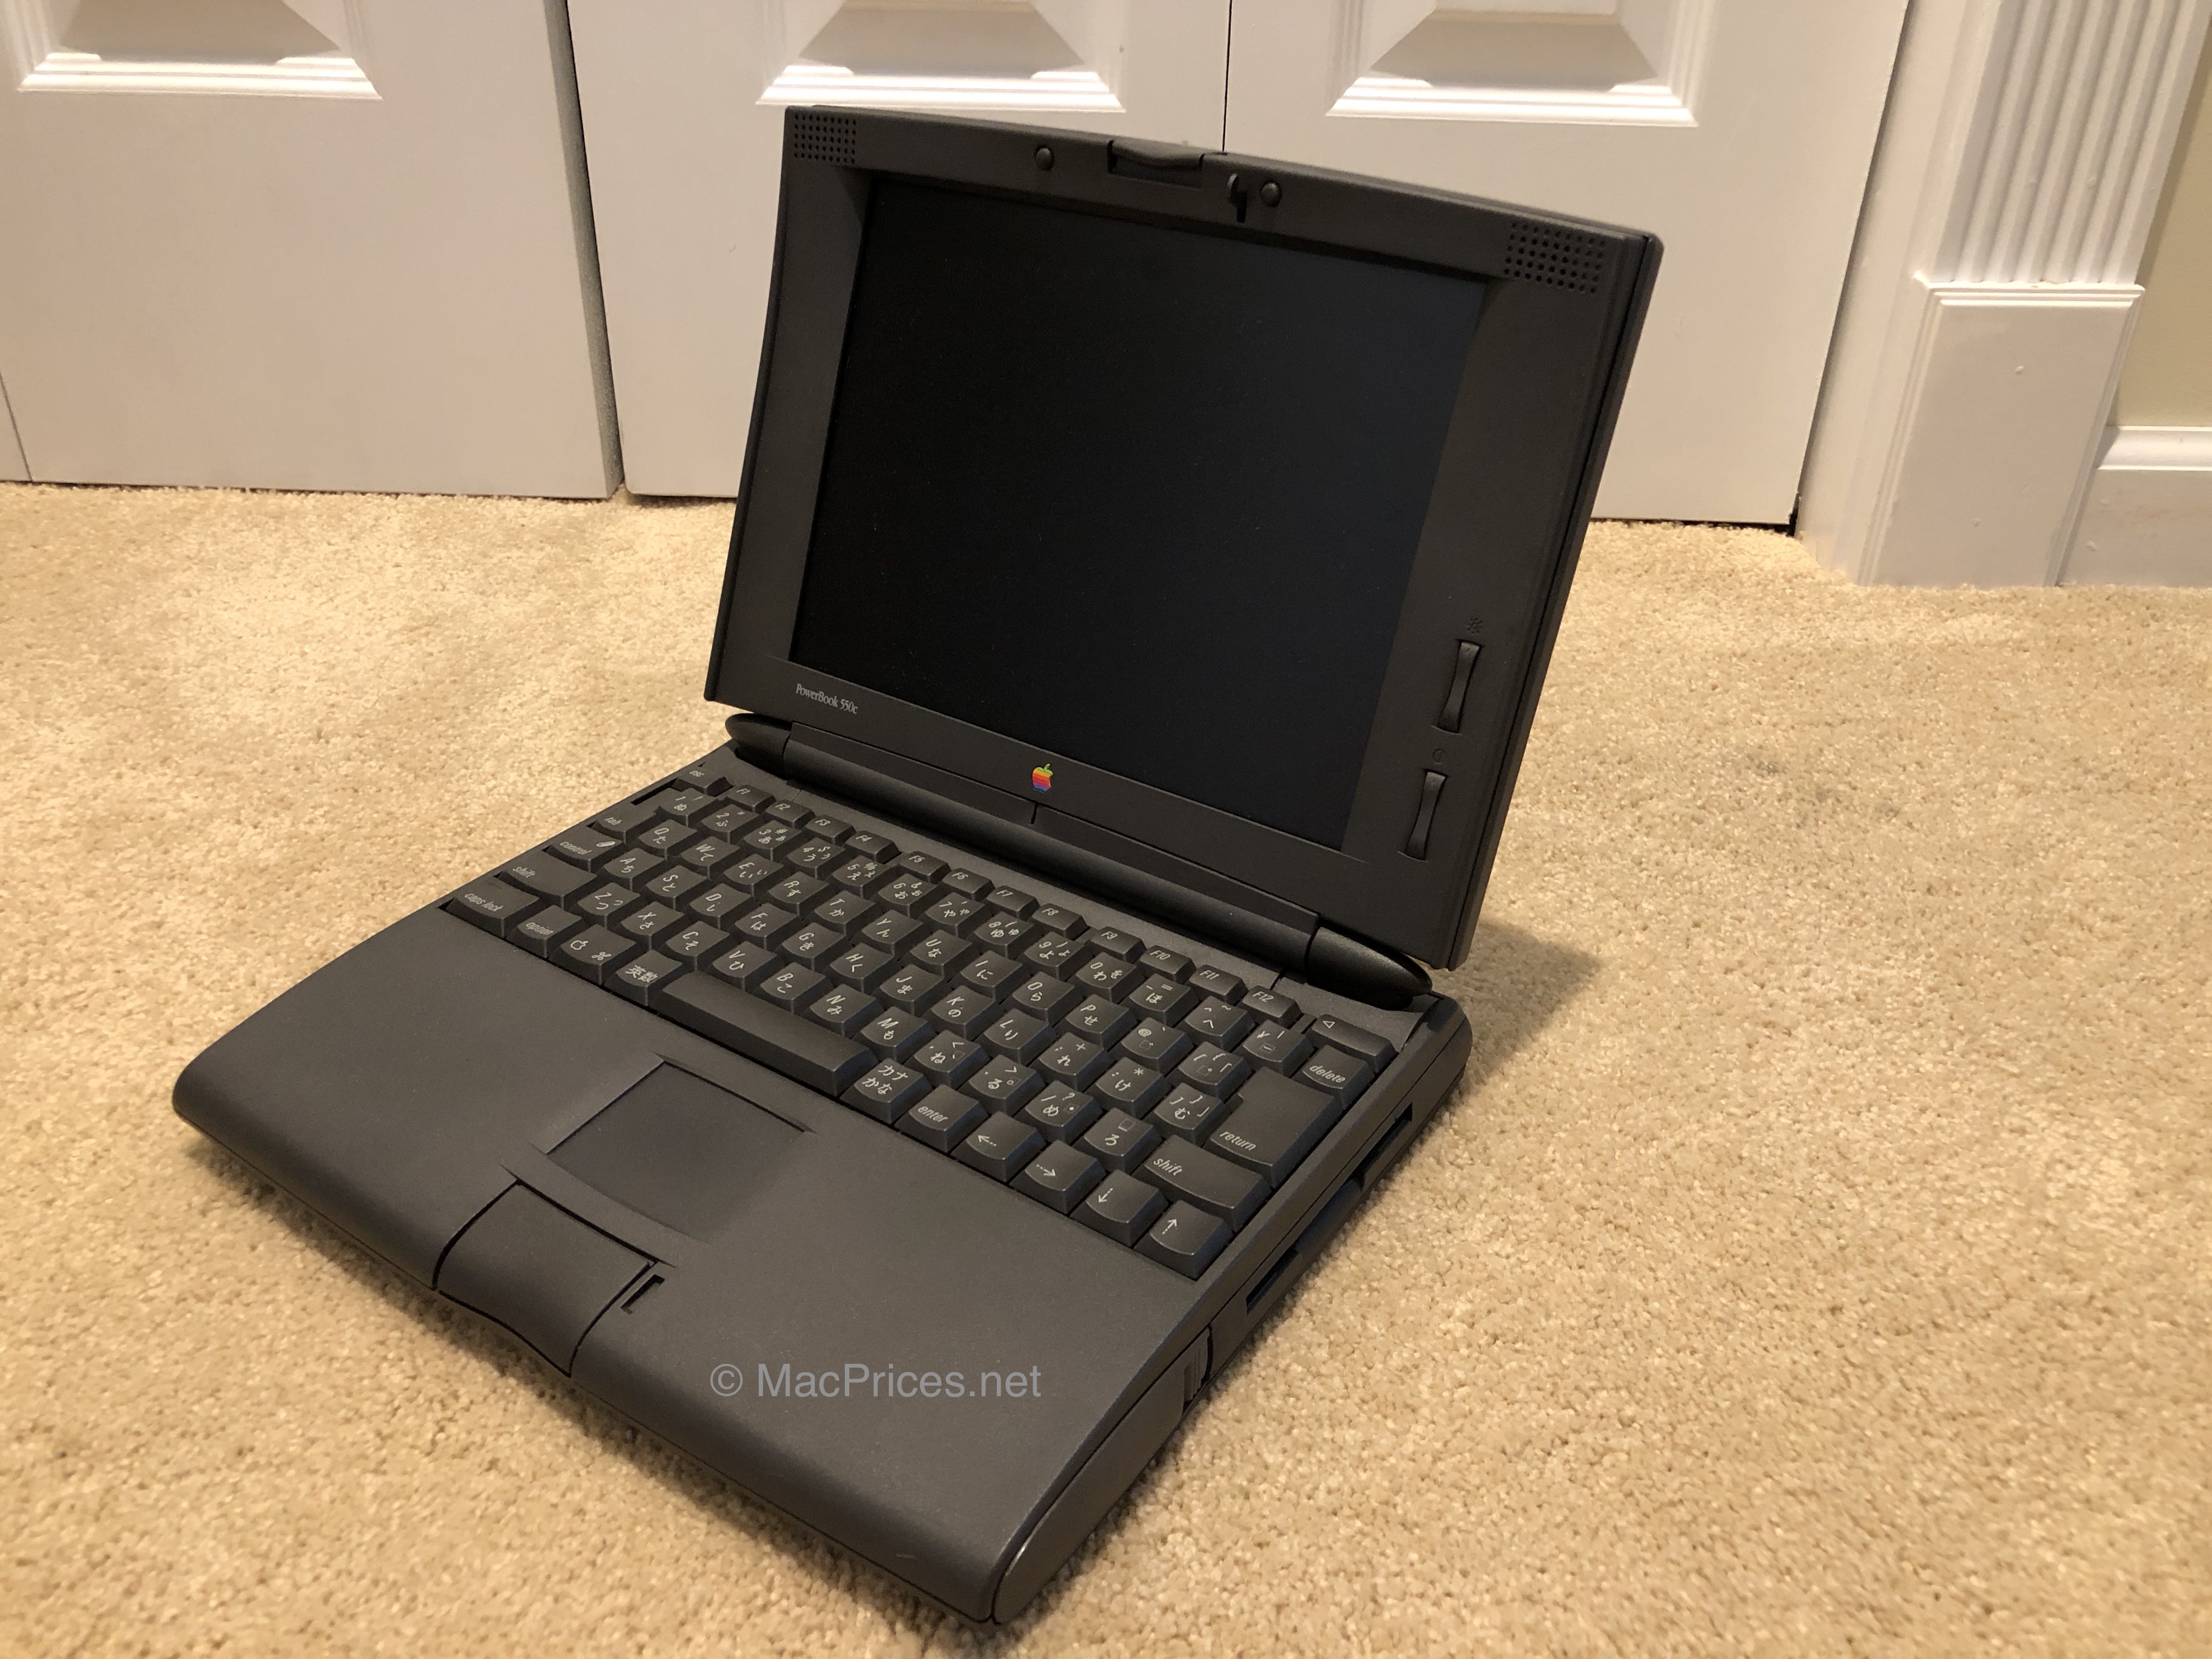 Rare Macs: The PowerBook 550c. Description, specifications, and 